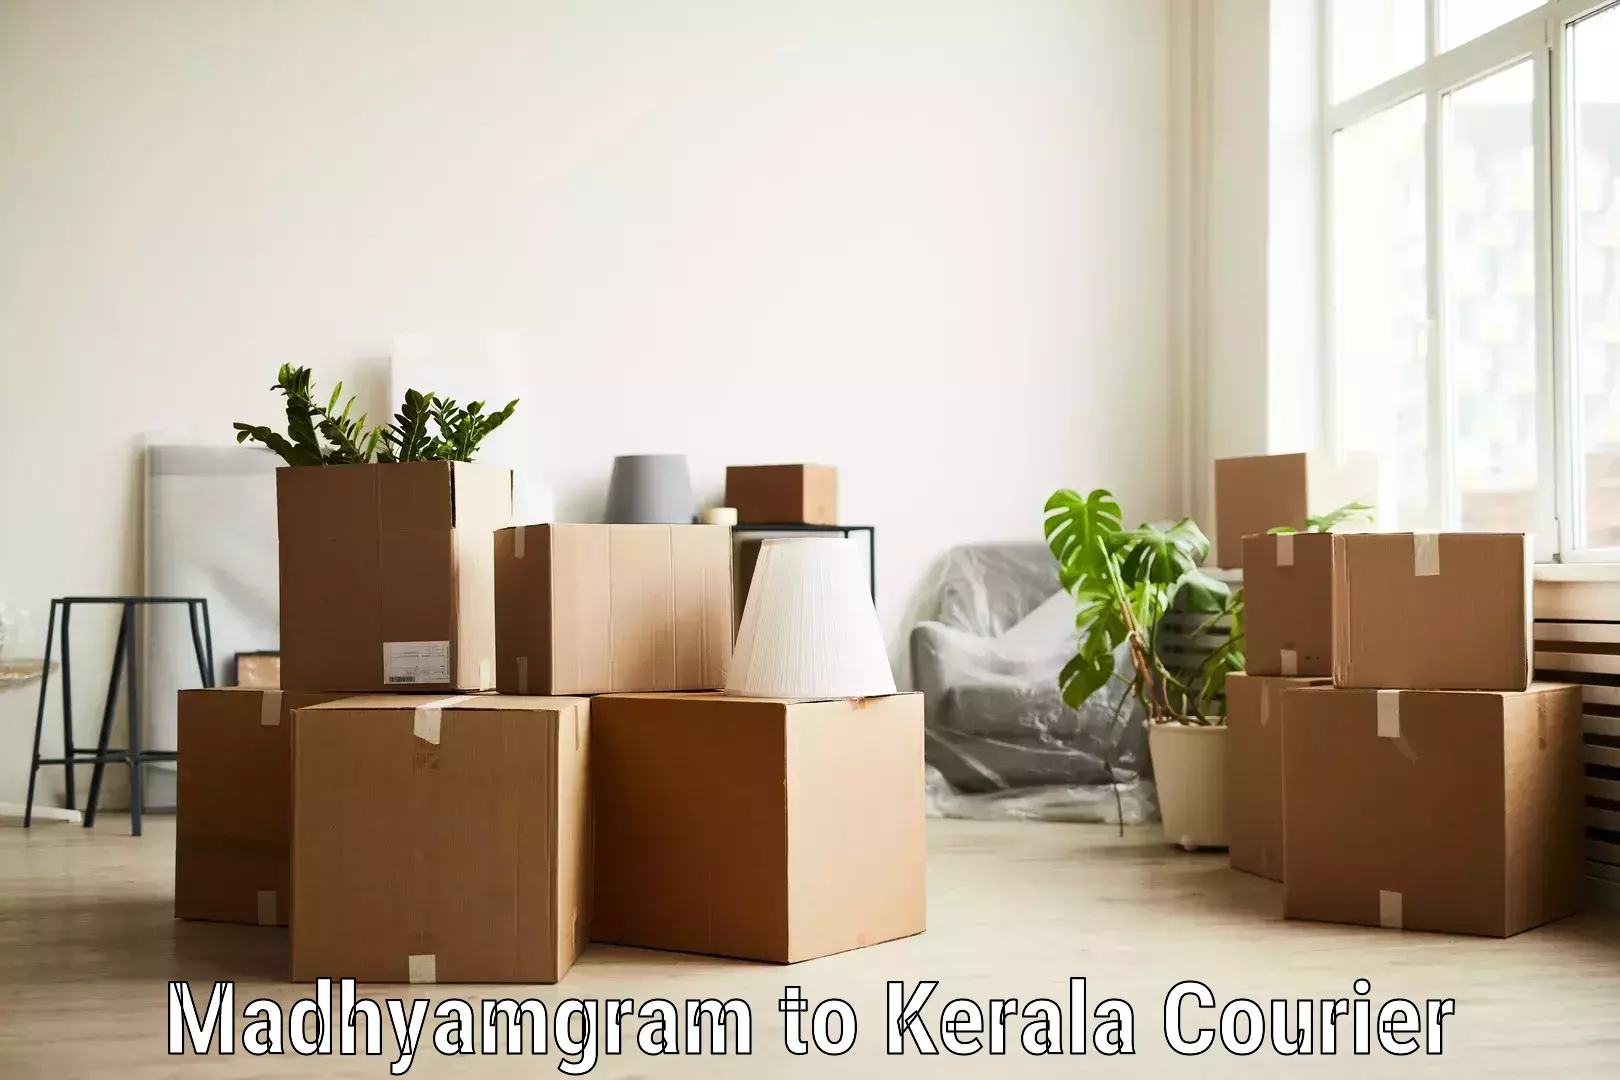 Parcel handling and care Madhyamgram to Kerala